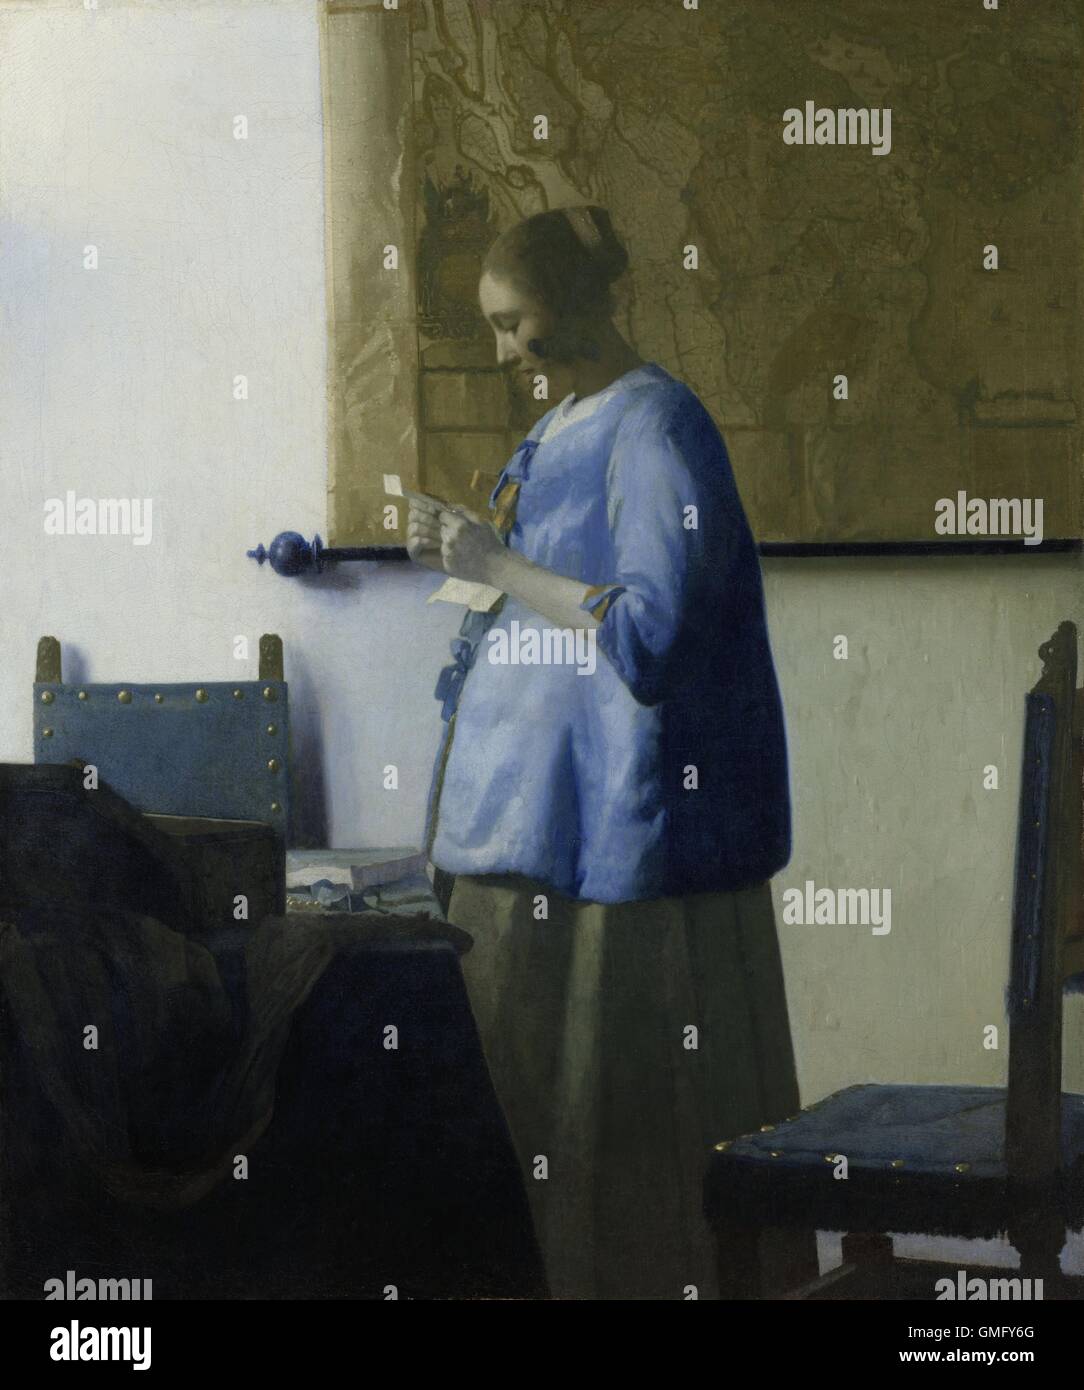 Woman Reading a Letter, by Johannes Vermeer, 1663, Dutch painting, oil on canvas. A young woman in a blue jacket, stands by a table with chairs. A large map hangs on the wall behind her (BSLOC 2016 3 1) Stock Photo